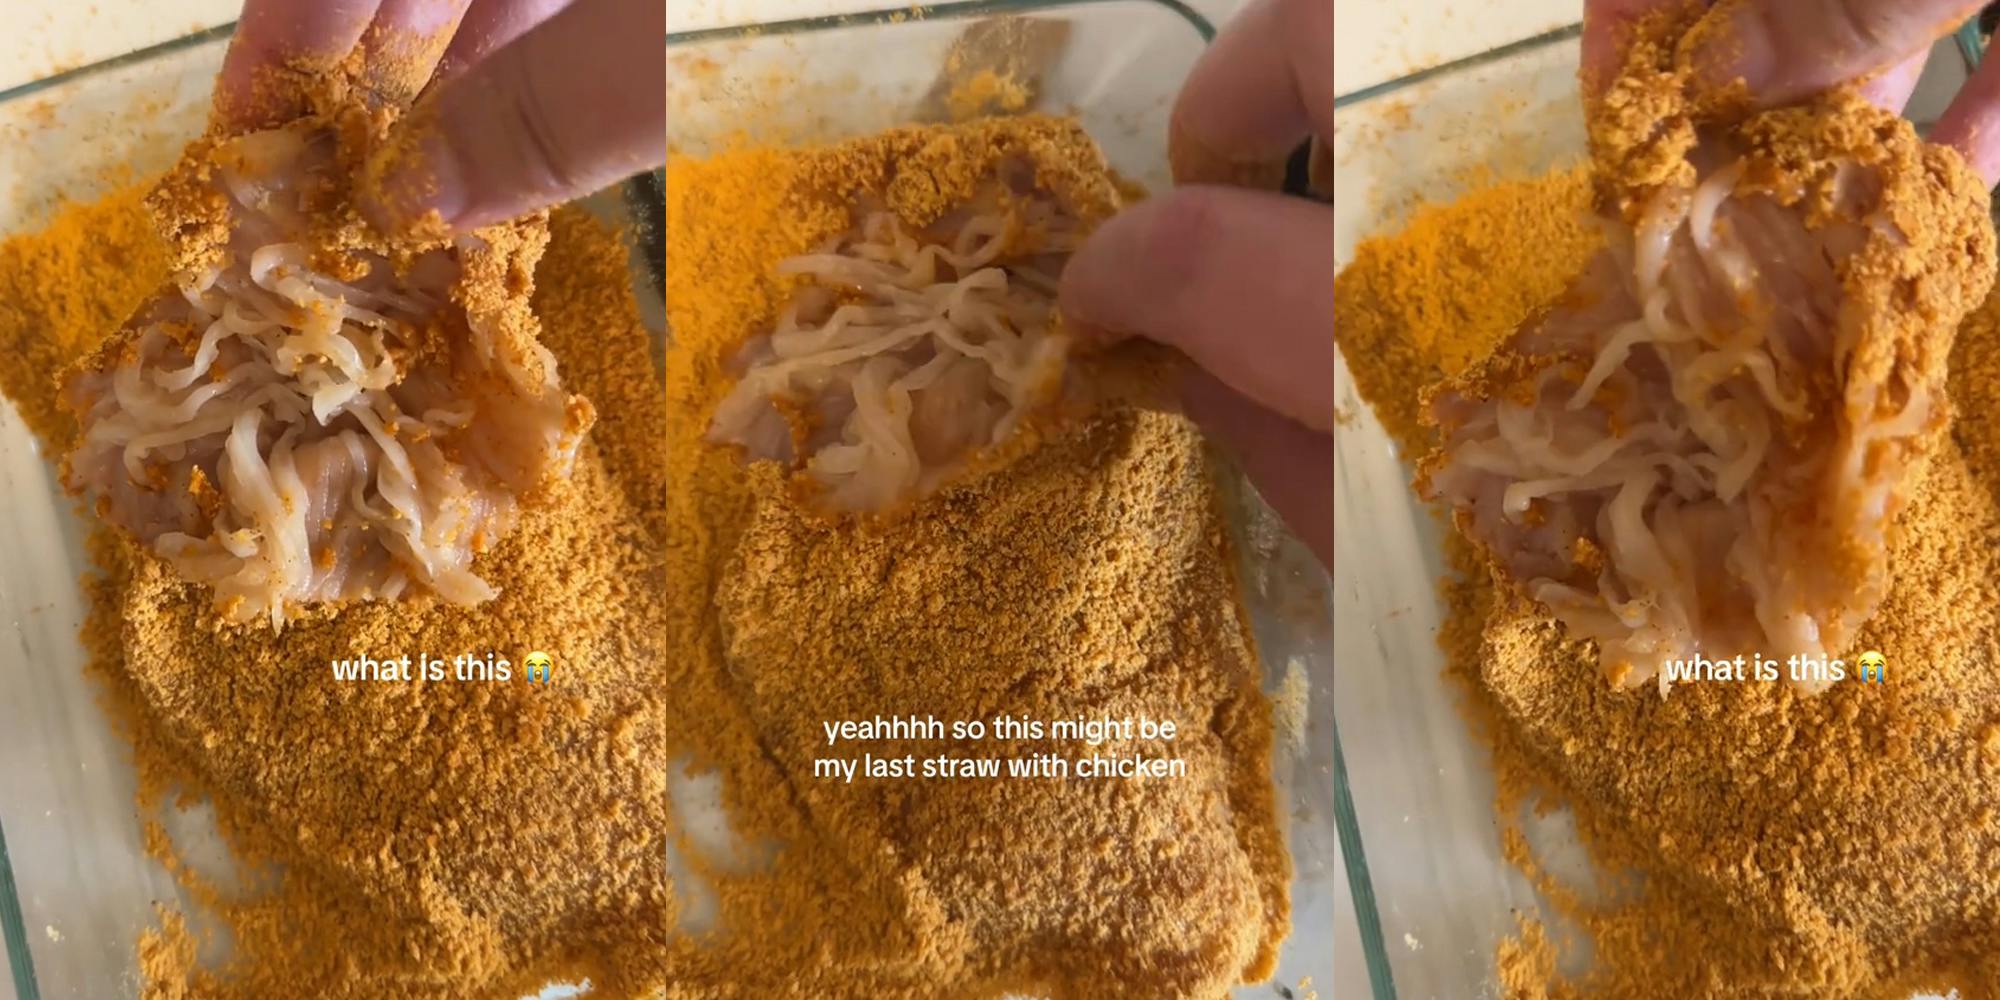 hand holding flap of cut chicken breaded in bowl with caption "what is this" (l) hand holding flap of cut chicken breaded in bowl with caption "yeahhh so this might be my last straw with chicken" (c) hand holding flap of cut chicken breaded in bowl with caption "what is this" (r)